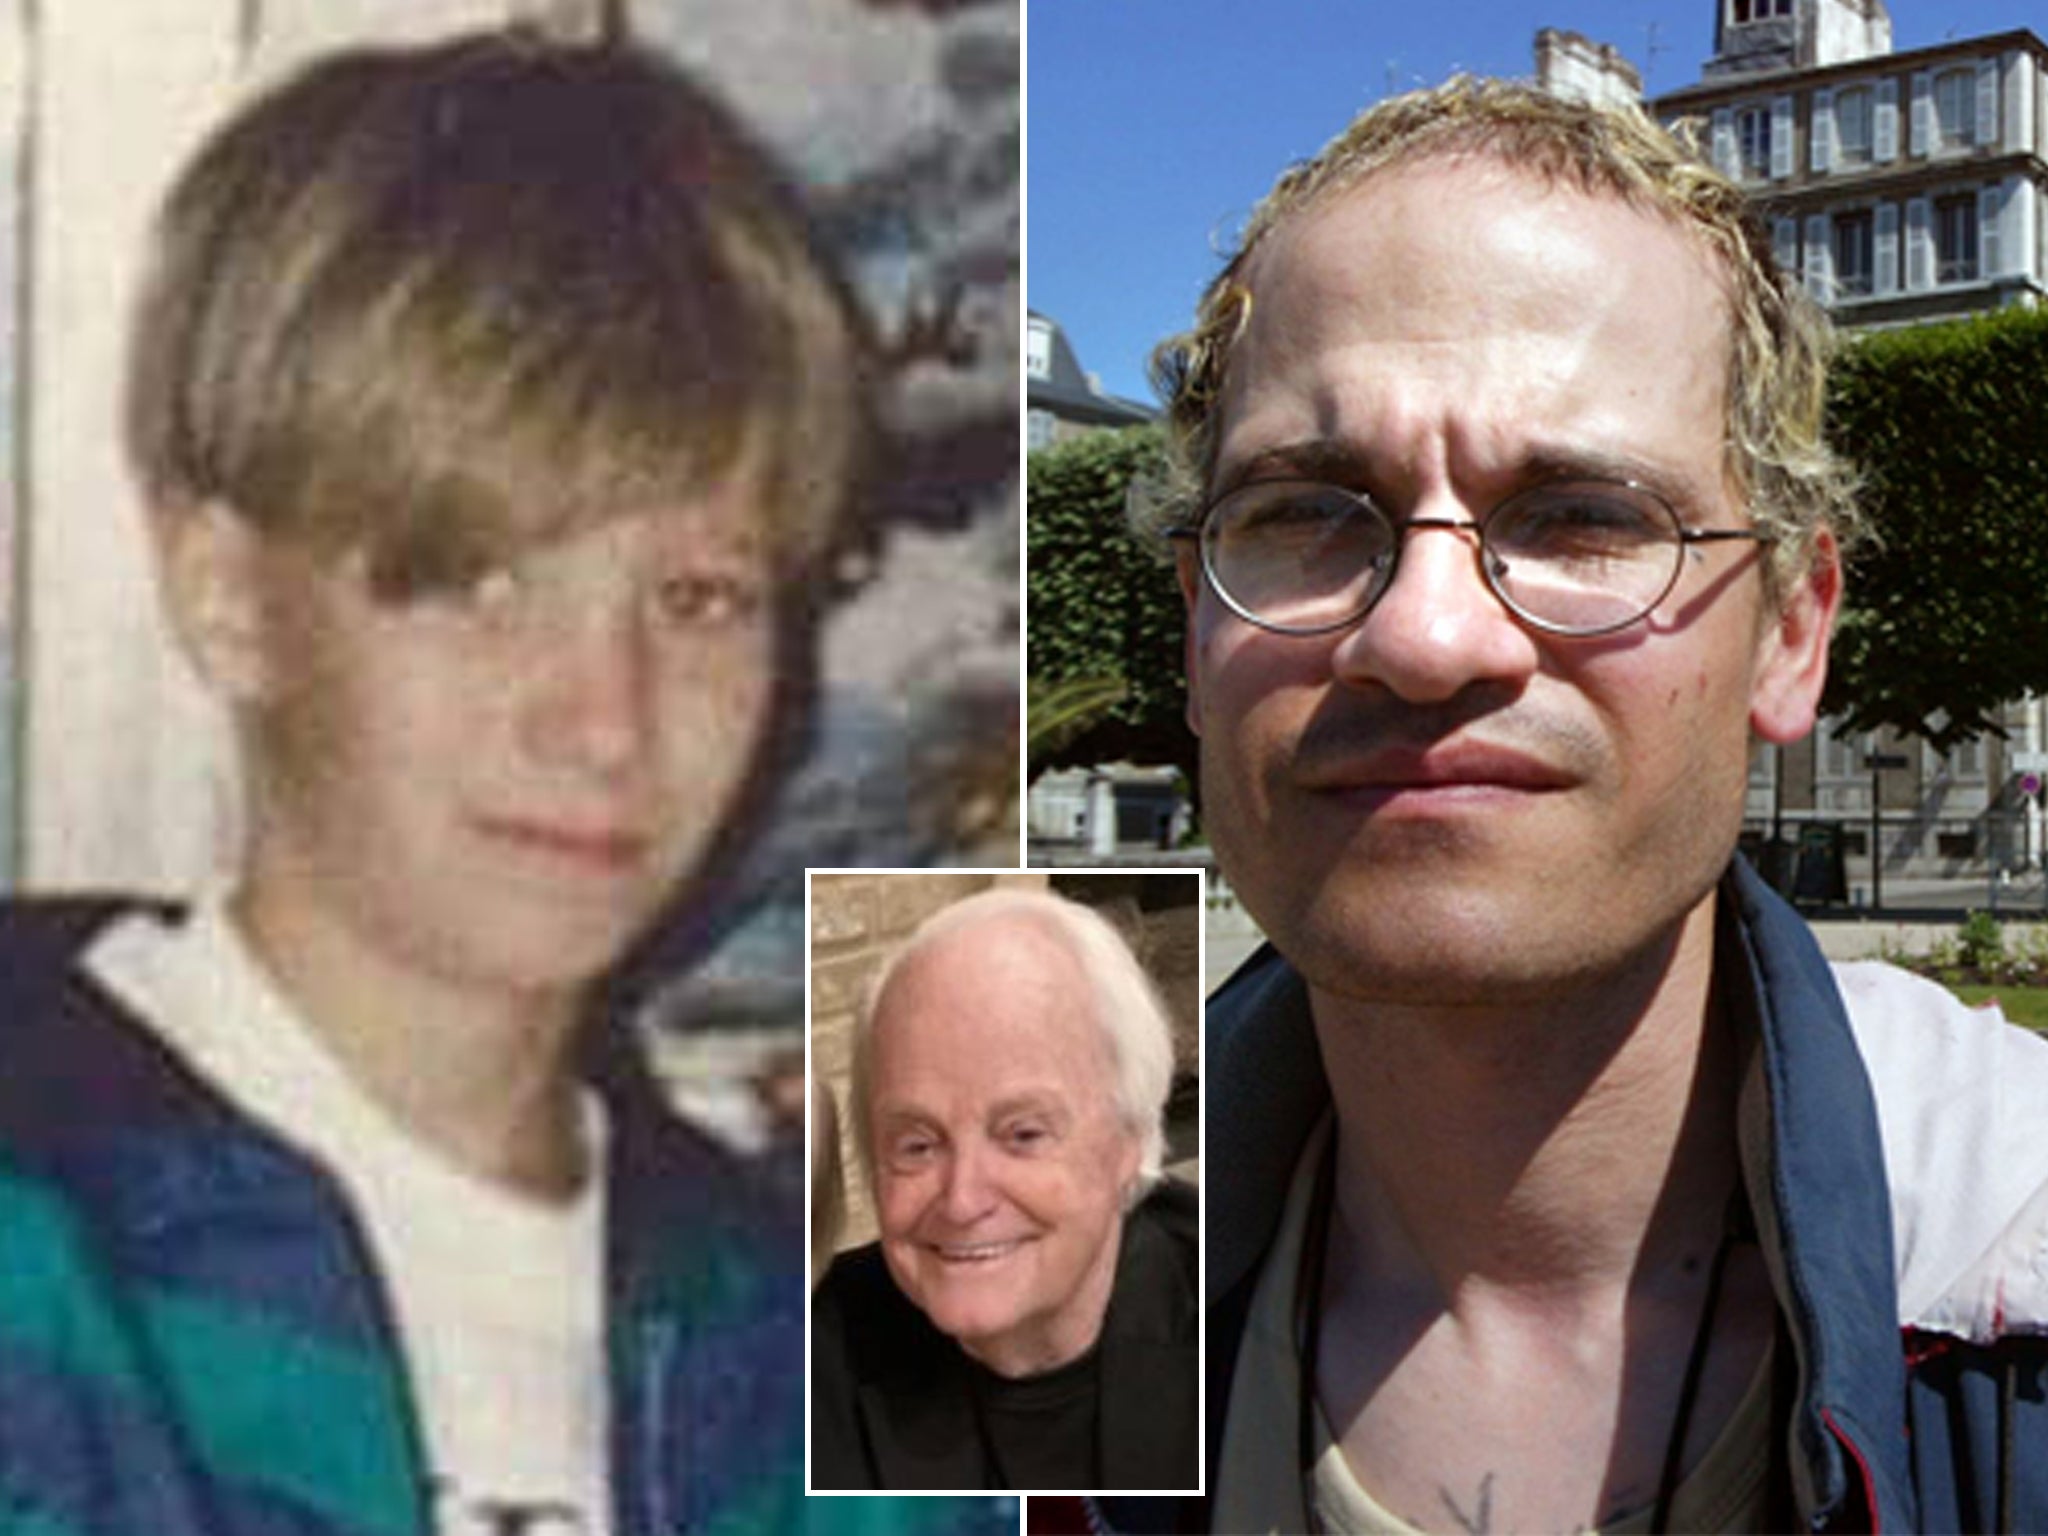 A French imposter convinced everyone he was missing Texas teen Nicholas Barclay photo